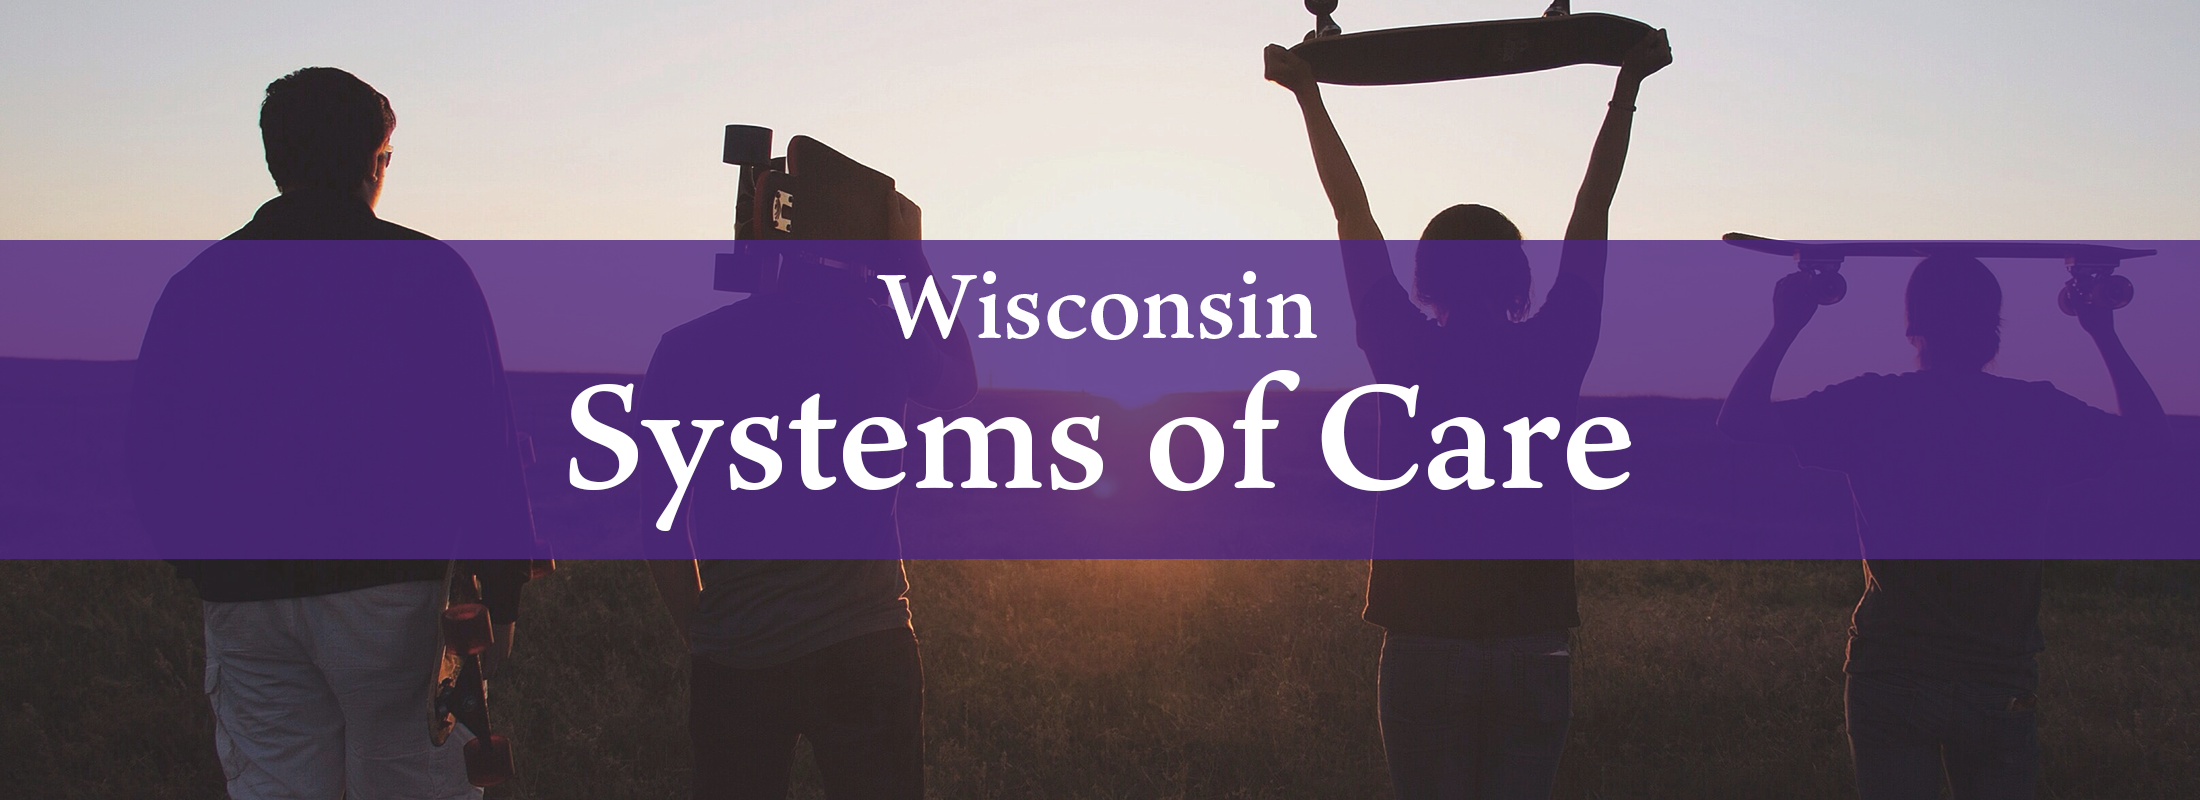 Wisconsin Systems of Care